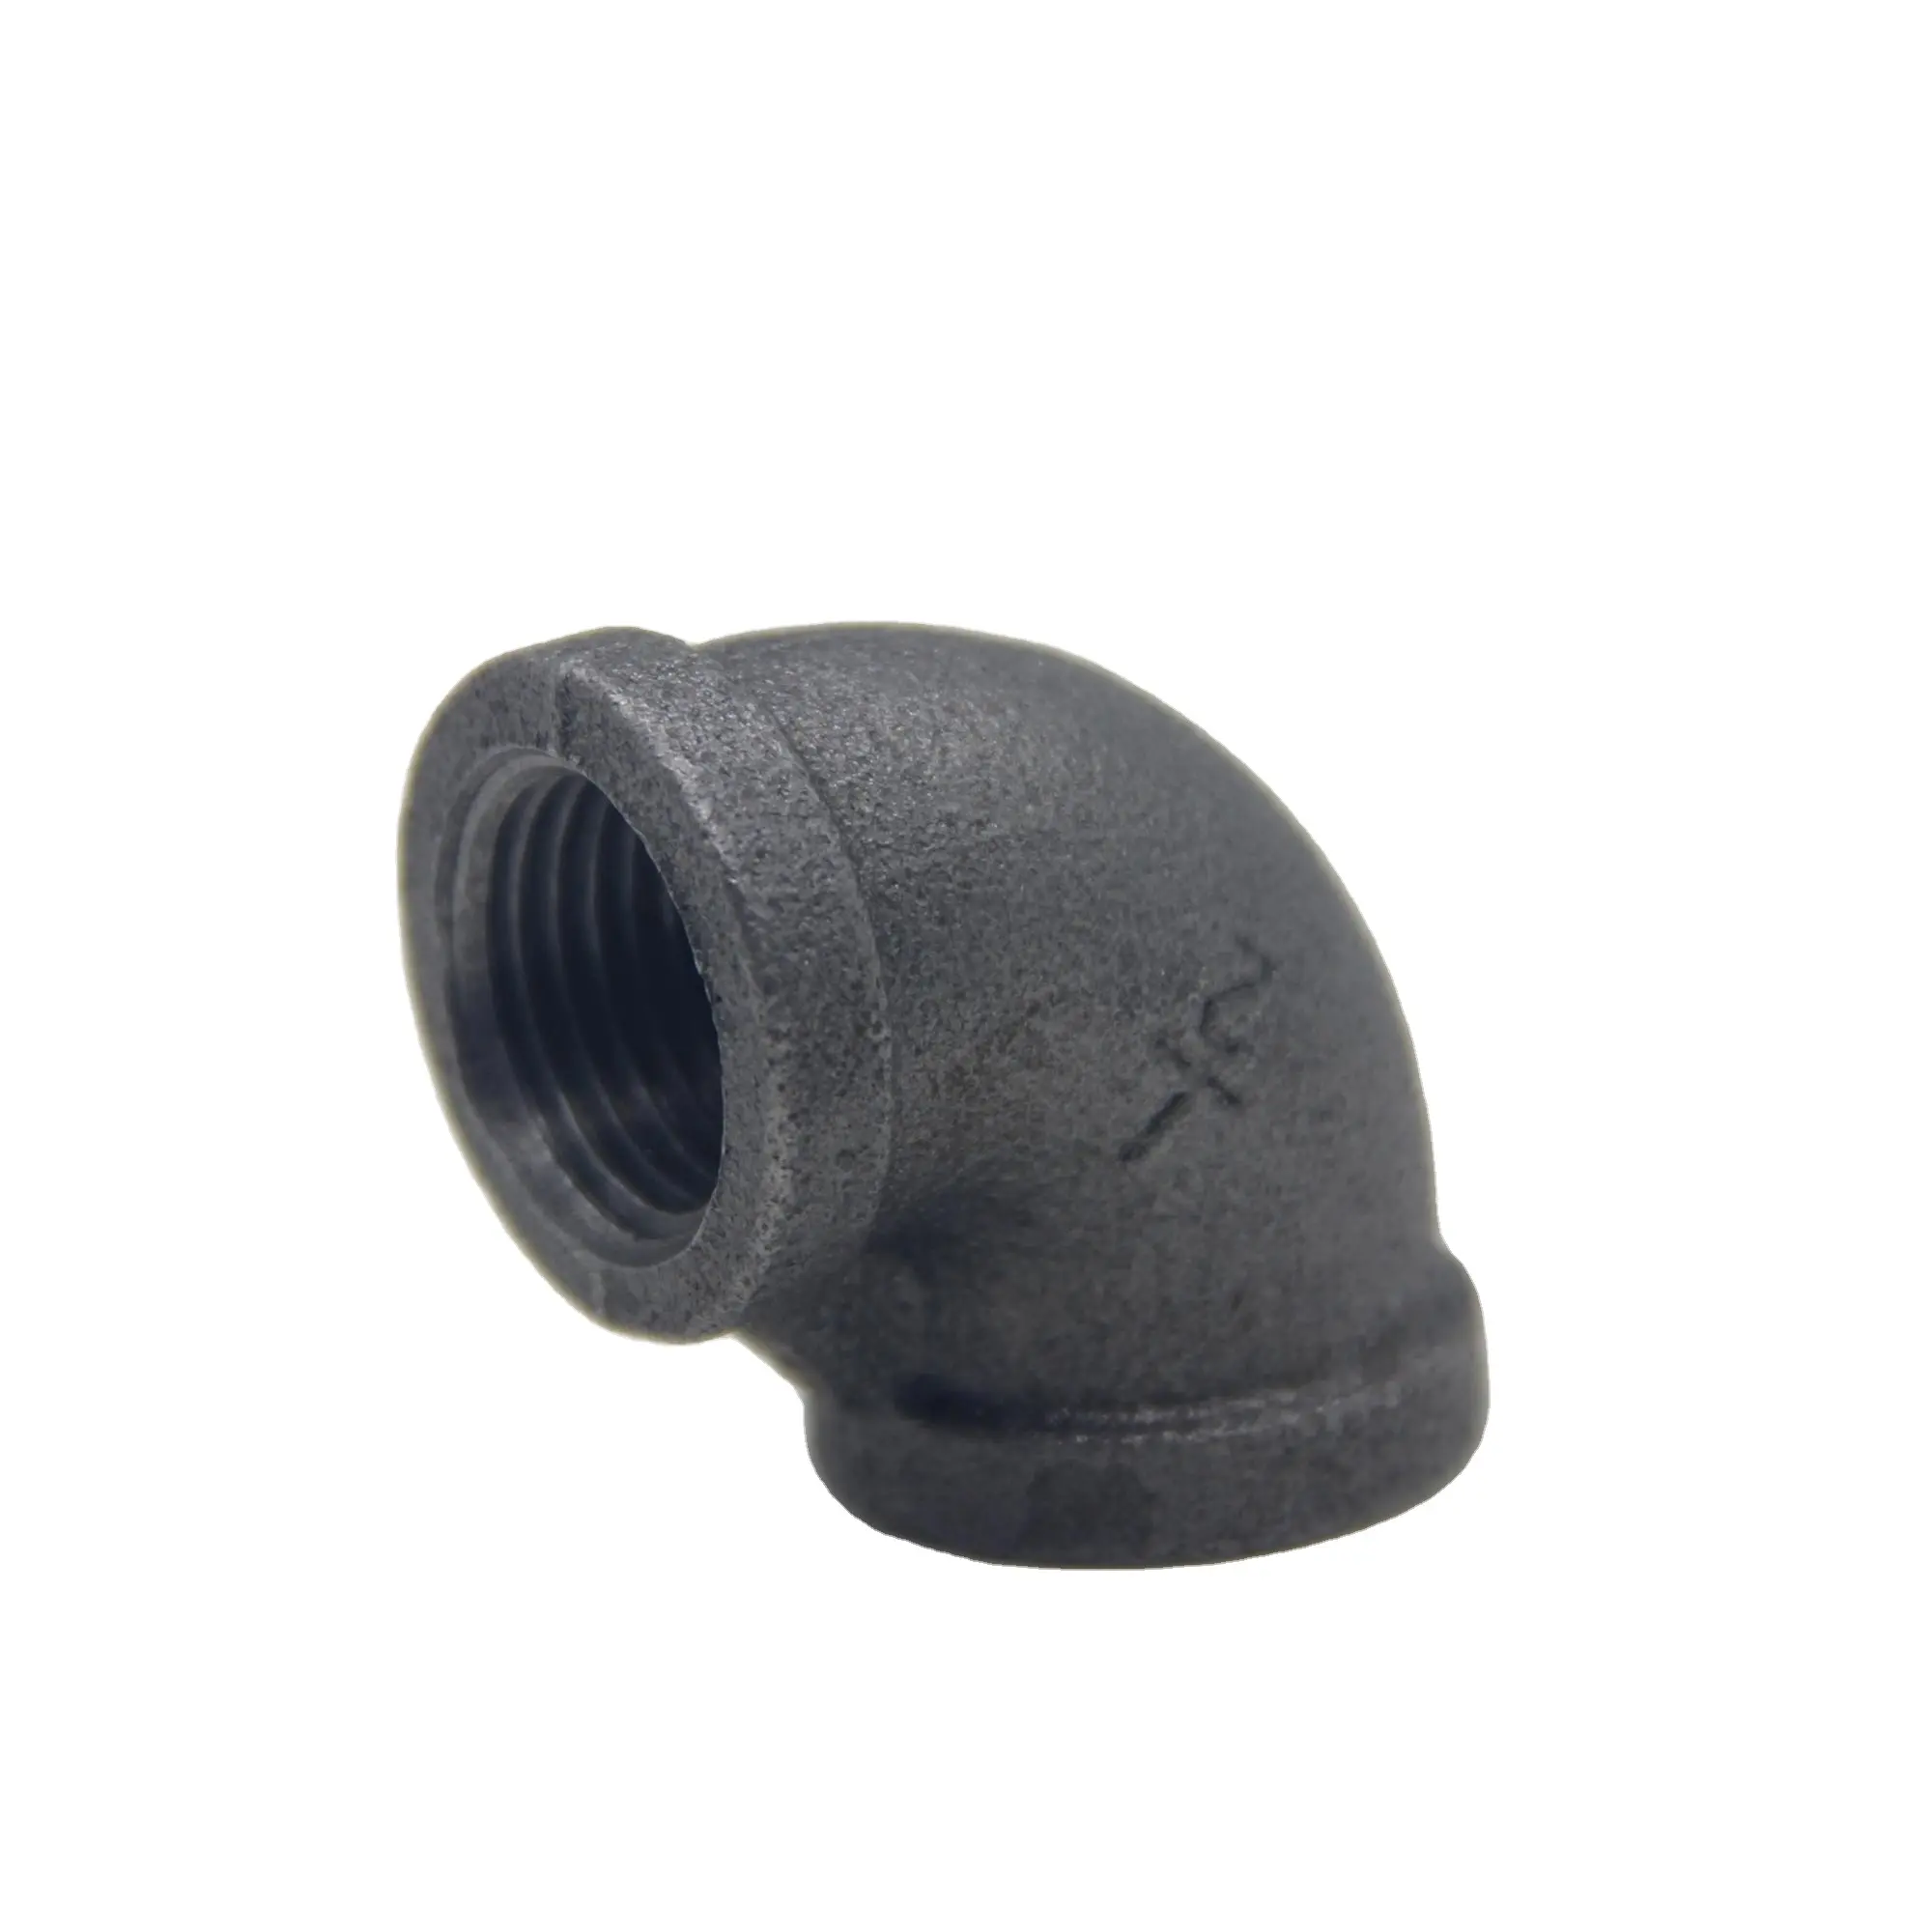 Pipe Fitting Black Banded 90 Degree 1/8"-6" Size Malleable Iron Pipe Fittings Elbow